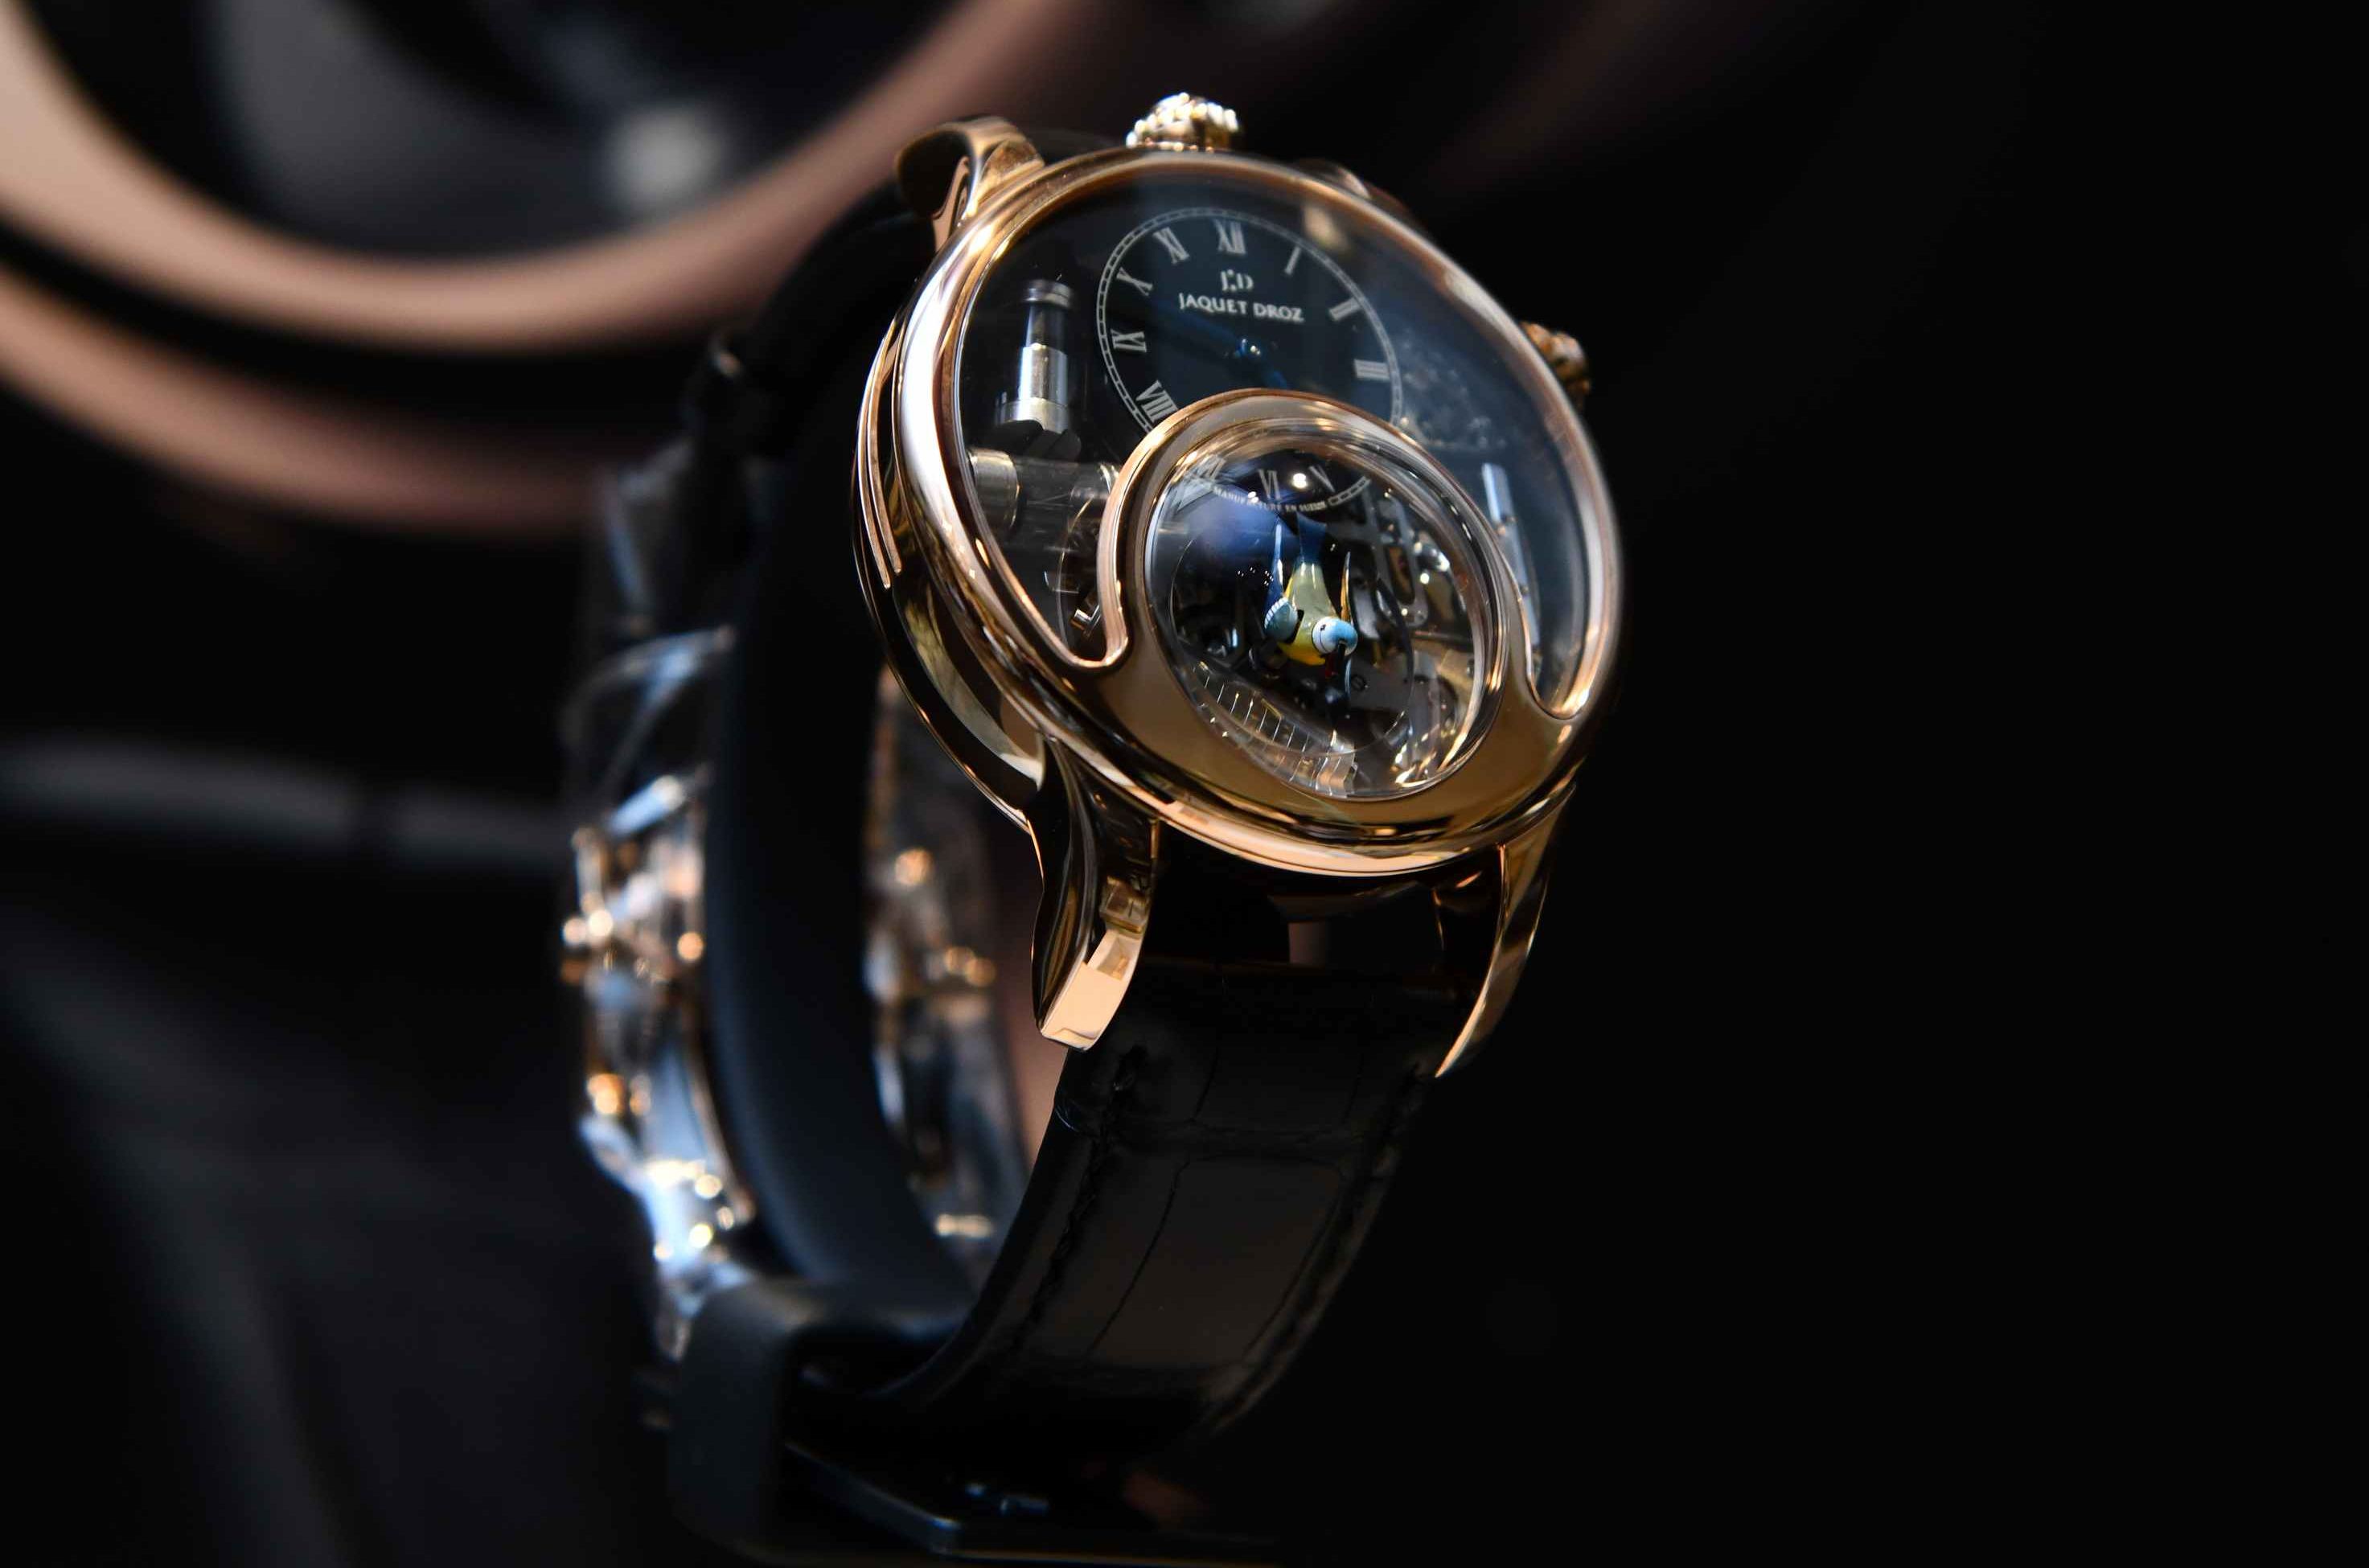 One of only 25 pieces in the world, the watch was showcased for the first time India